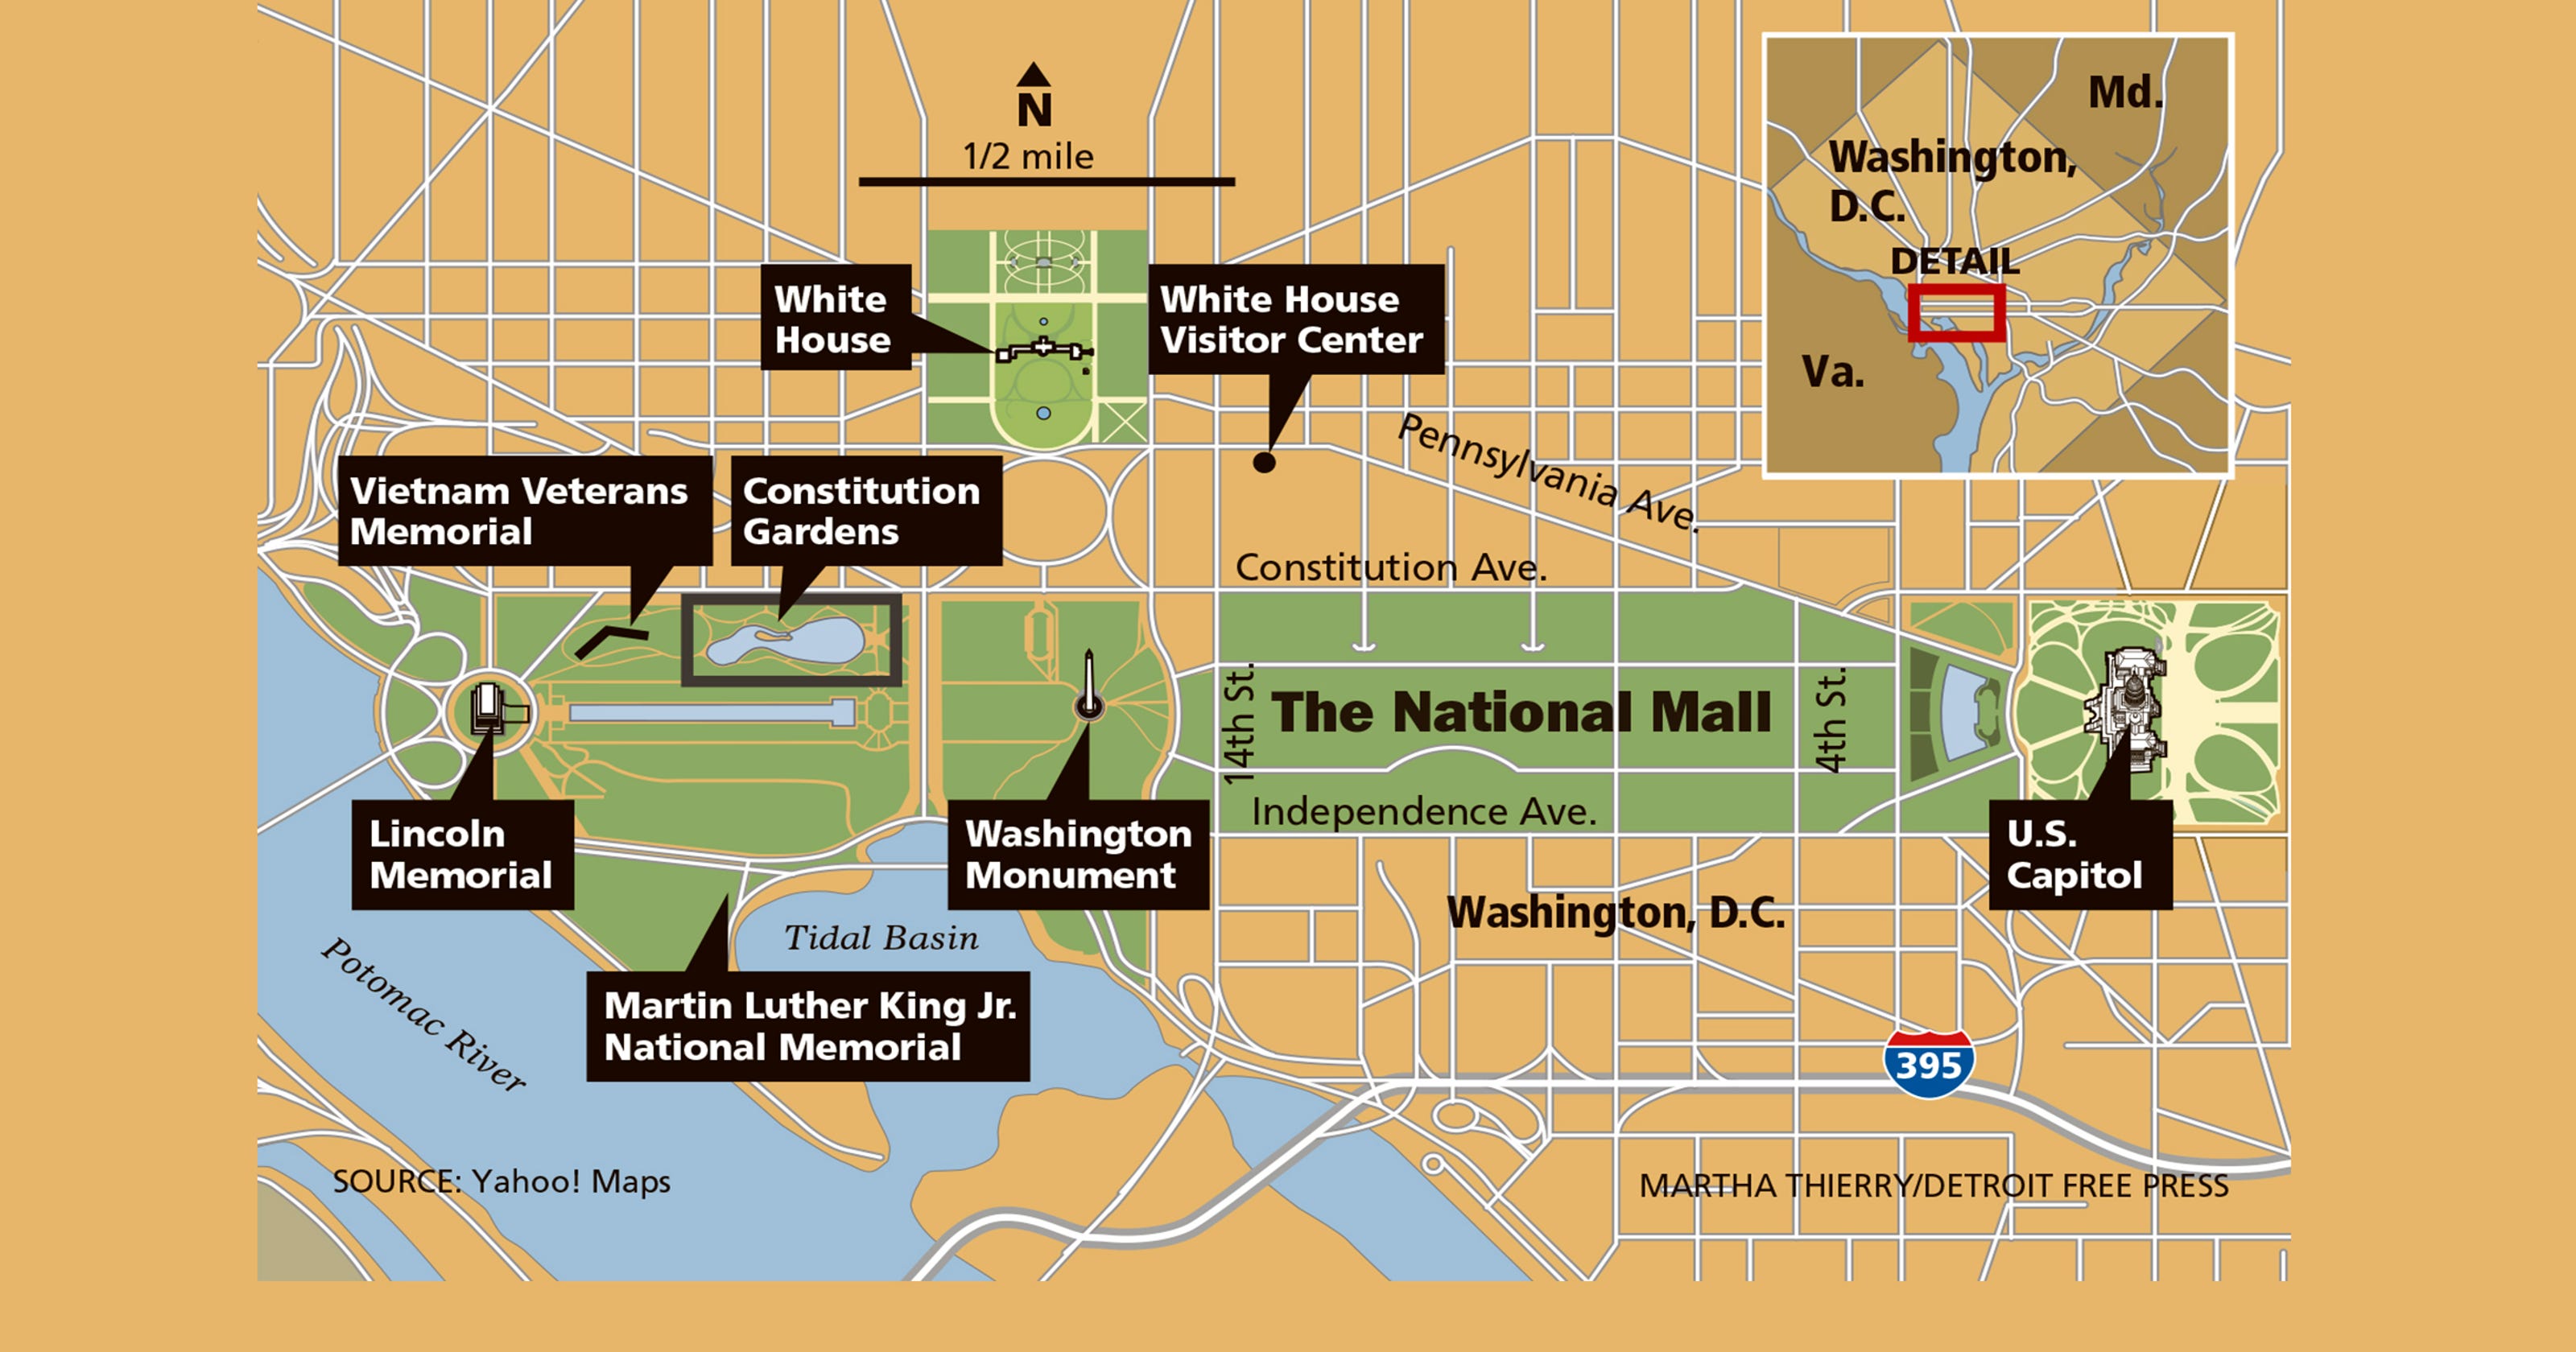 1412202893000 DFP Travel National Mall 1005 MAP PRESTO ?width=3200&height=1680&fit=crop